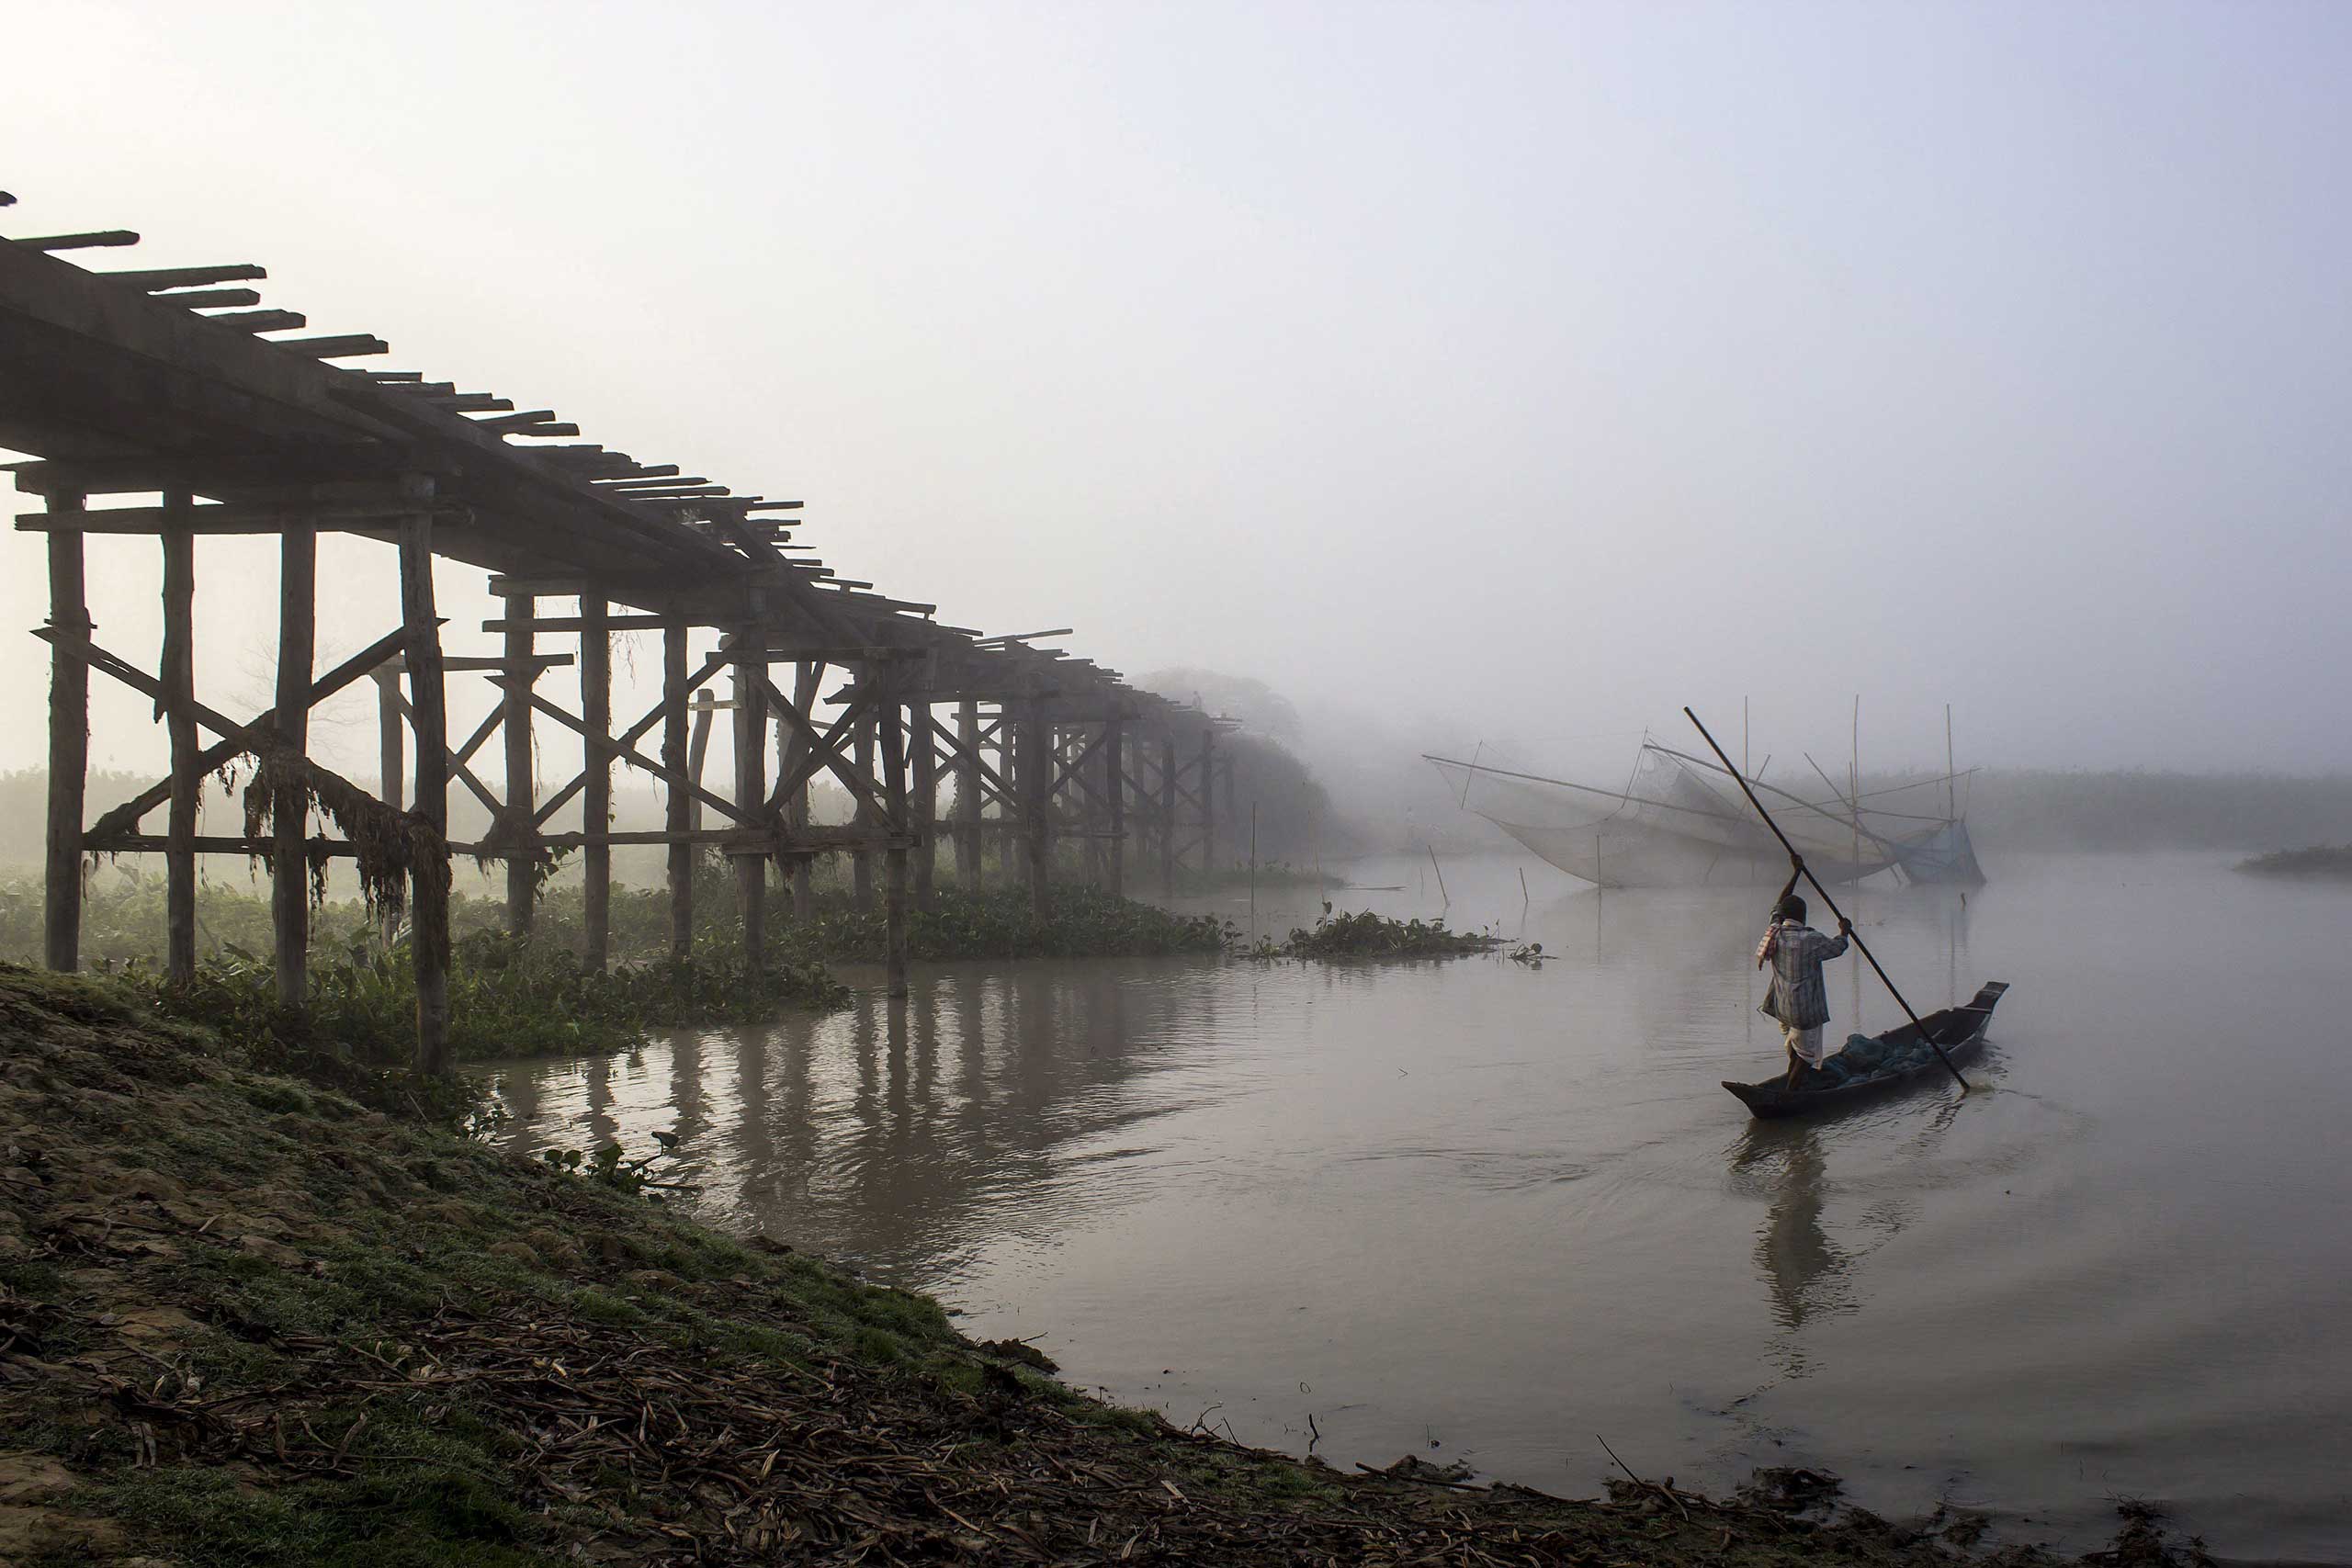 Nov. 12, 2014. An Indian fisherman rows his boat towards his fishing nets on a misty morning on the outskirts of Sivasagar district, in eastern Assam state. Temperatures country-wide are slowly dropping as winter is setting in.